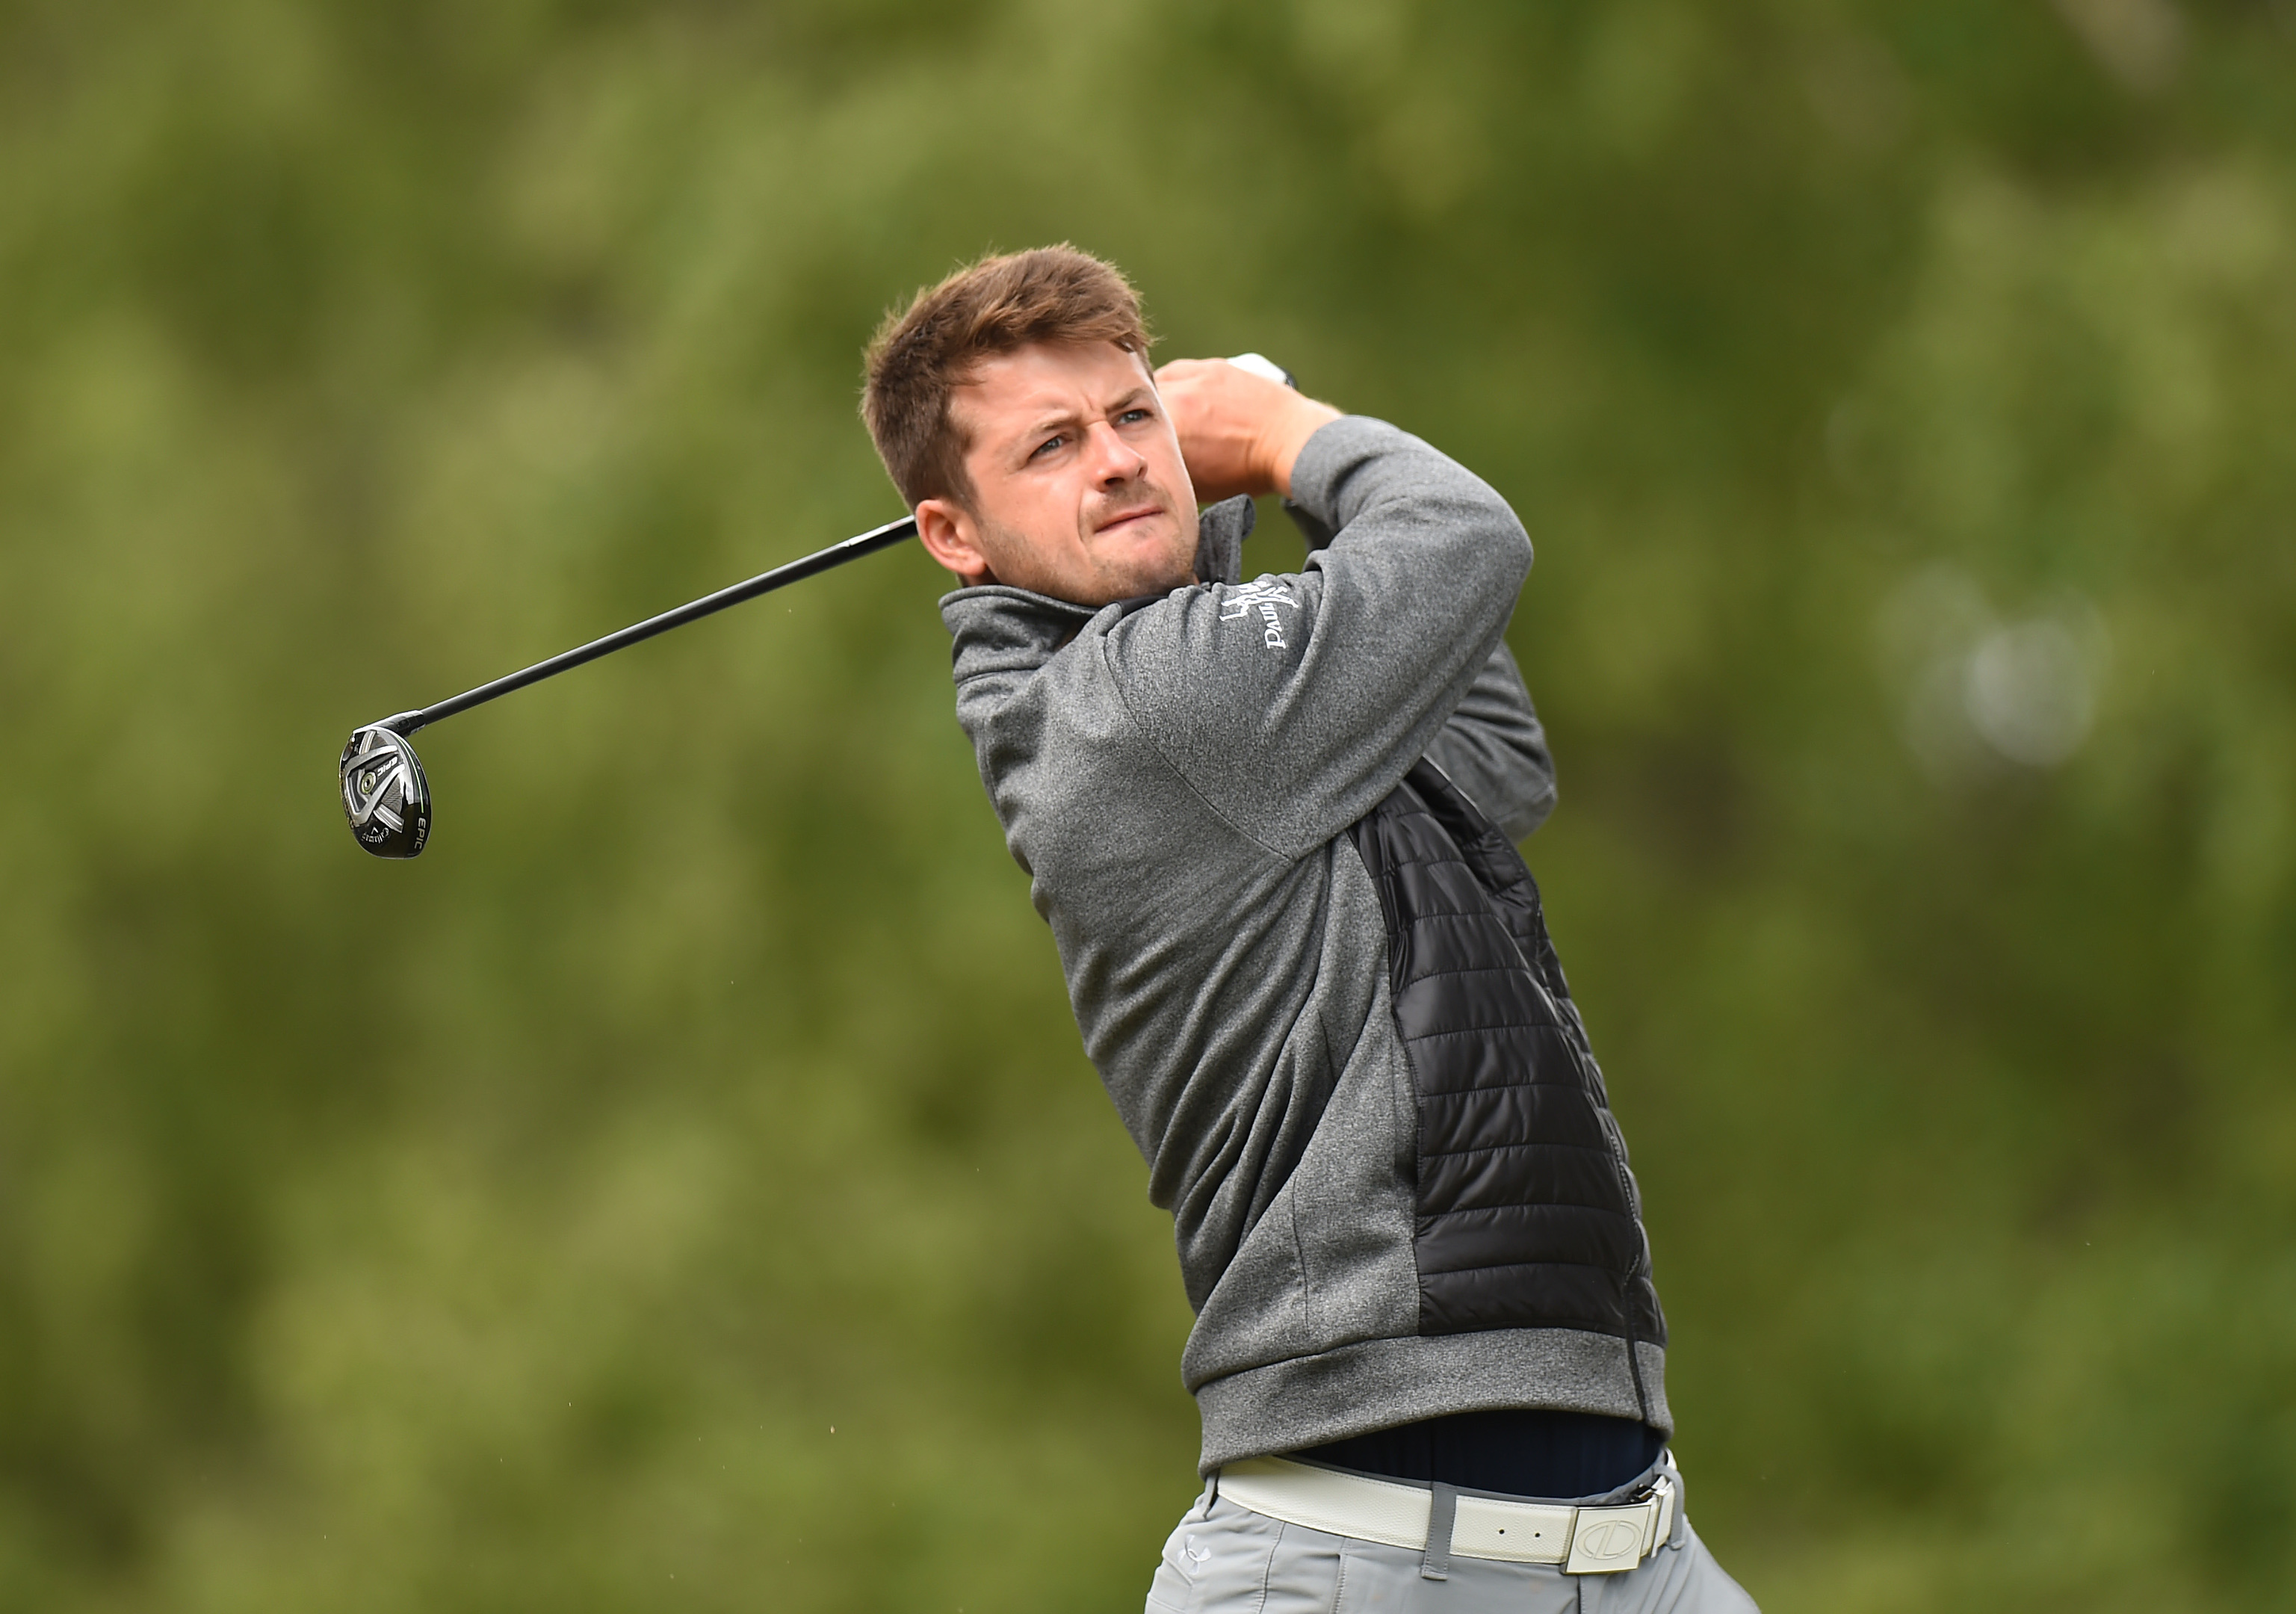 David Law shot a final round 67 to win the SSE Scottish Hydro Challenge.